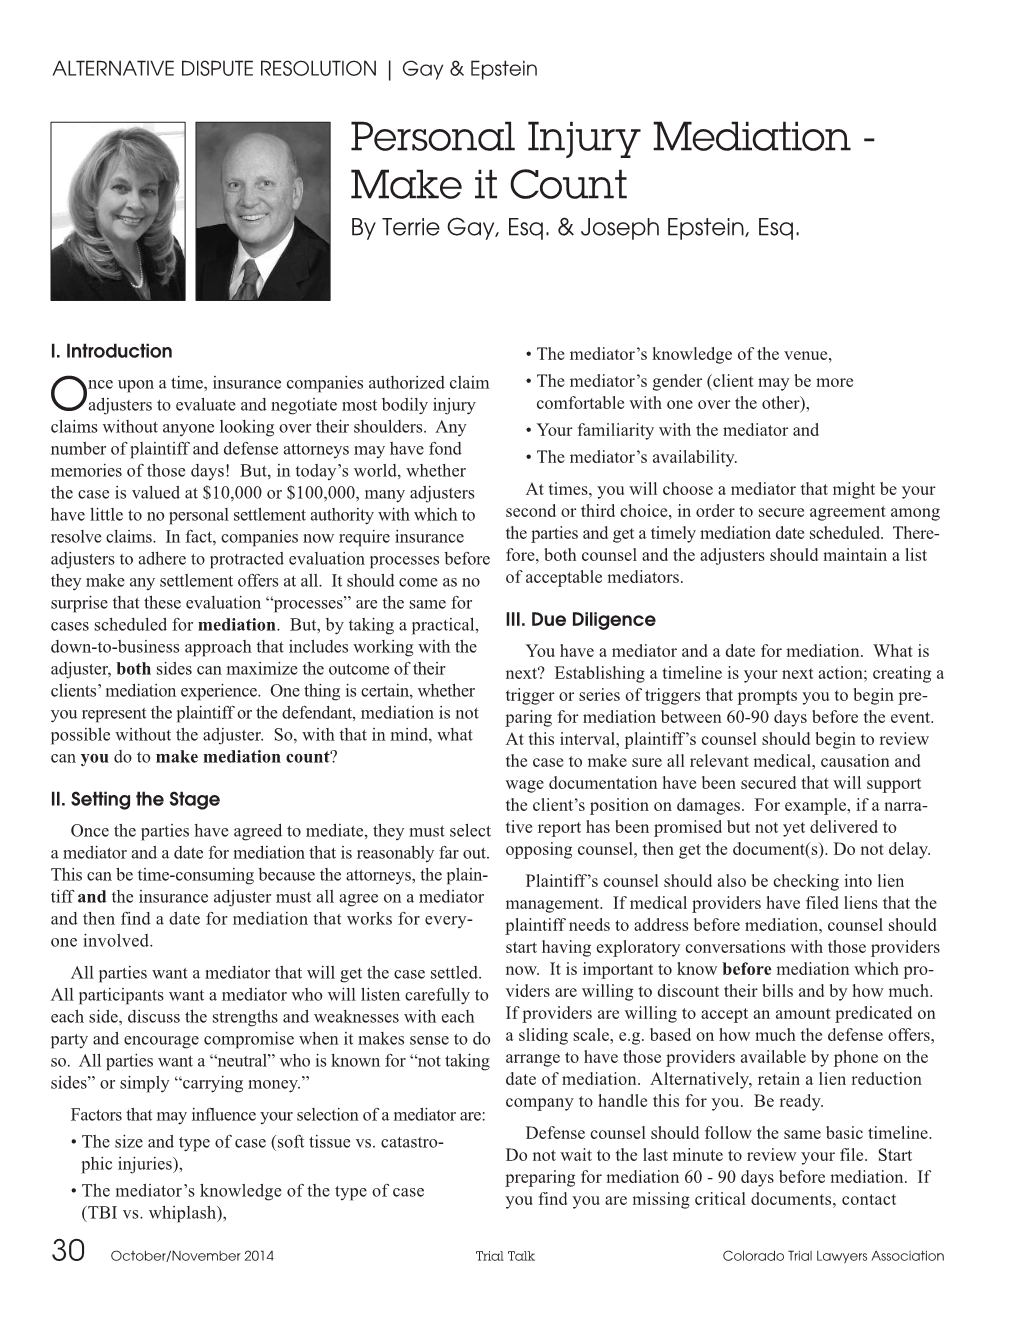 Personal Injury Mediation - Make It Count by Terrie Gay, Esq